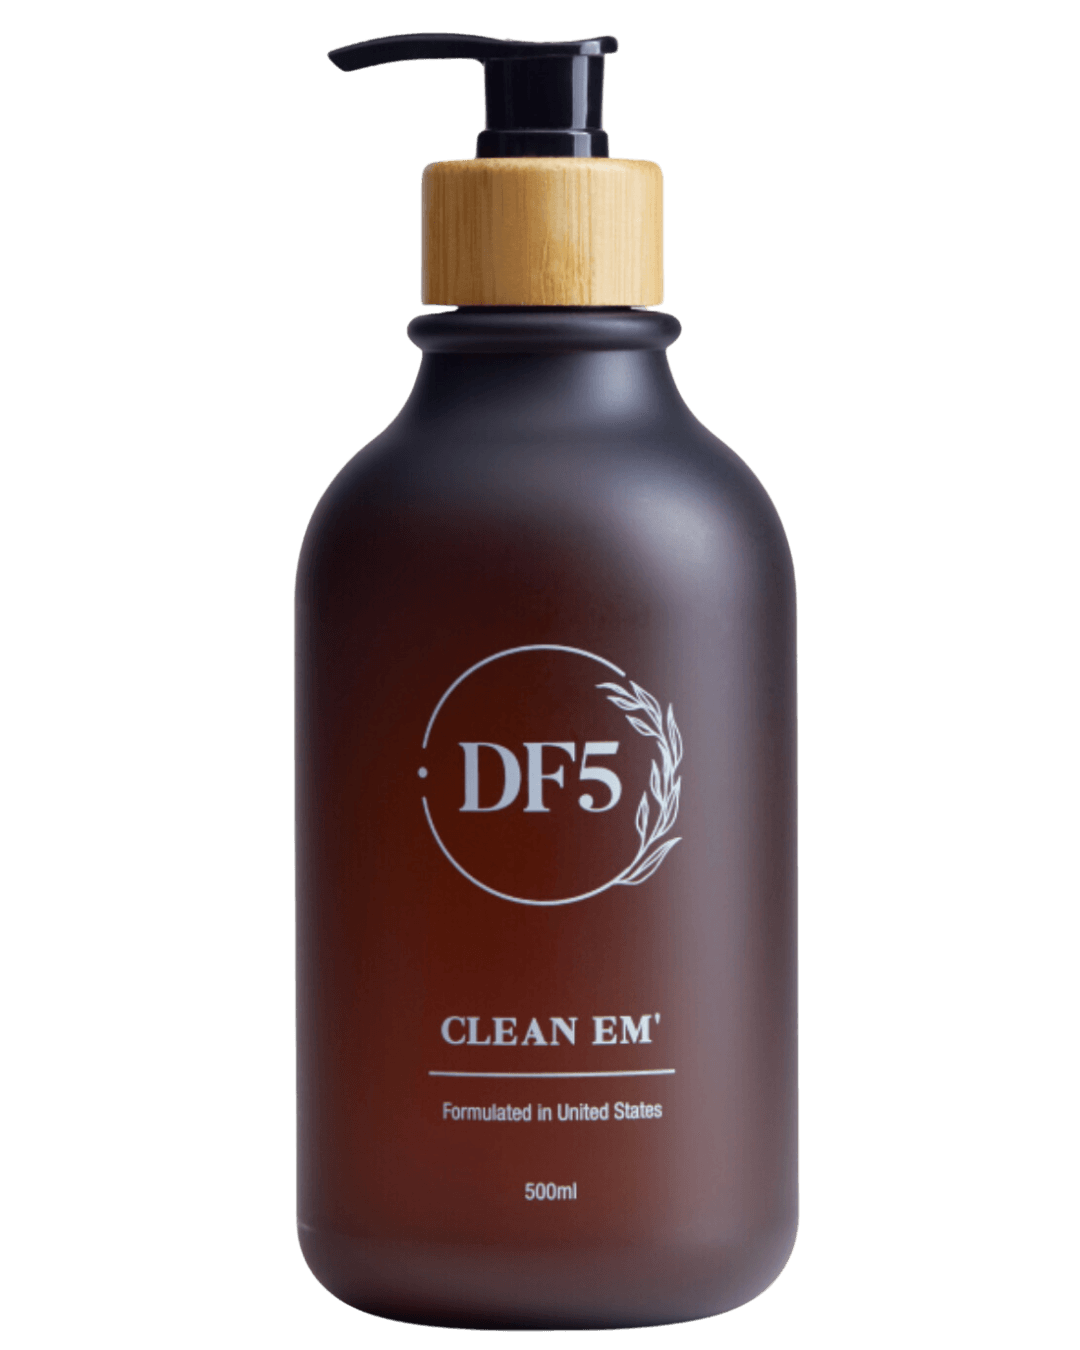 Daily Vanity Beauty Awards 2024 Best Hair care DF5 Clean Em’ Voted By Beauty Experts